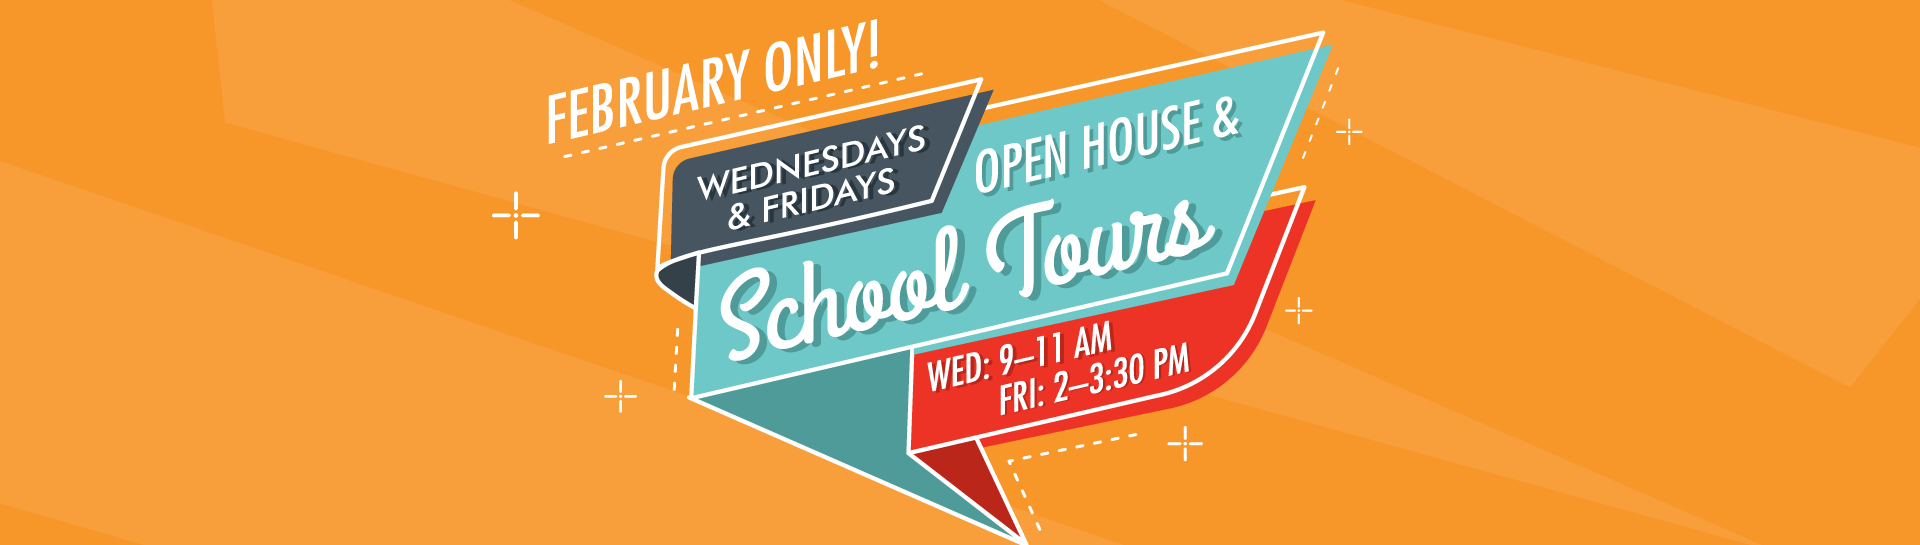 School tours in February - every Wednesday and Friday